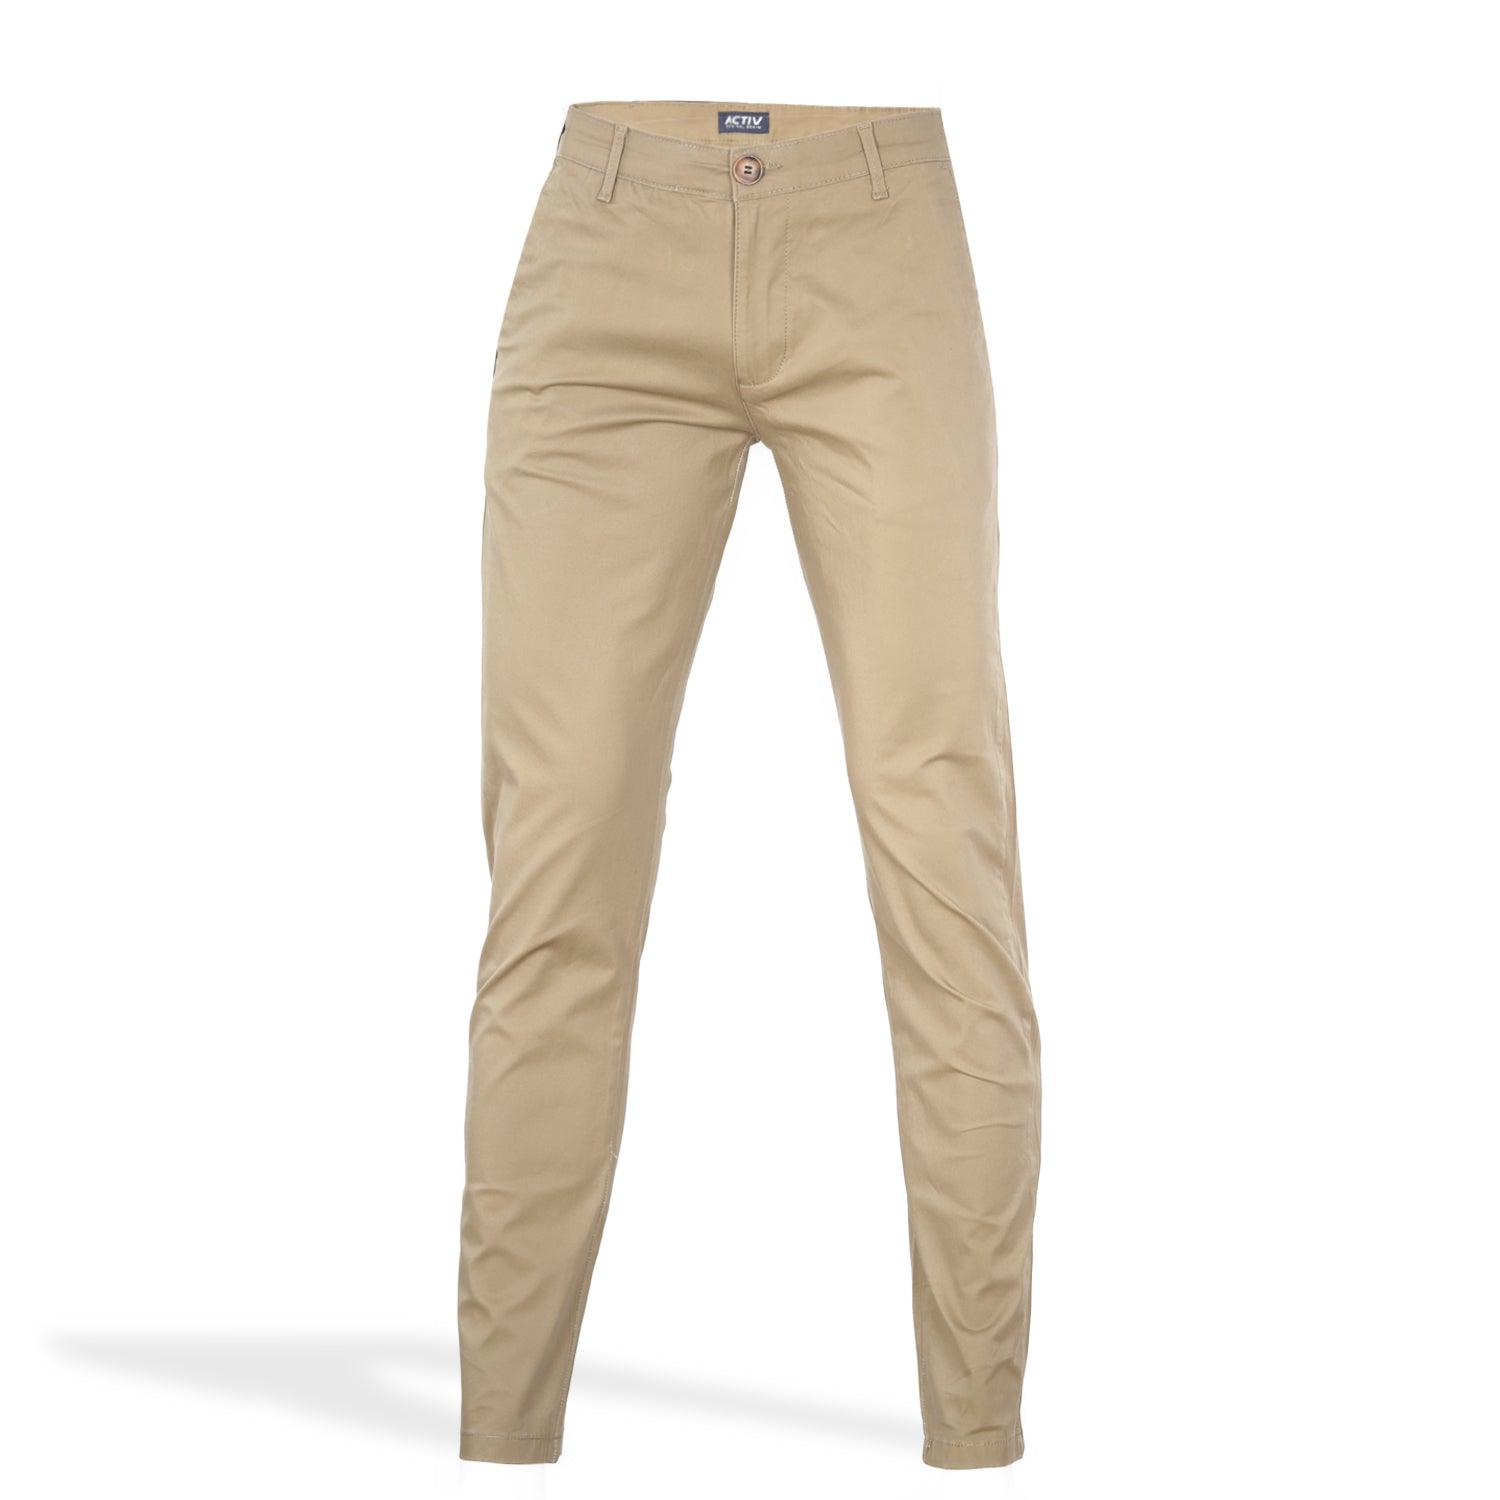 ACTIV CHINO TROUSERS - BROWN TECH-PNT1953 Activ Abou Alaa